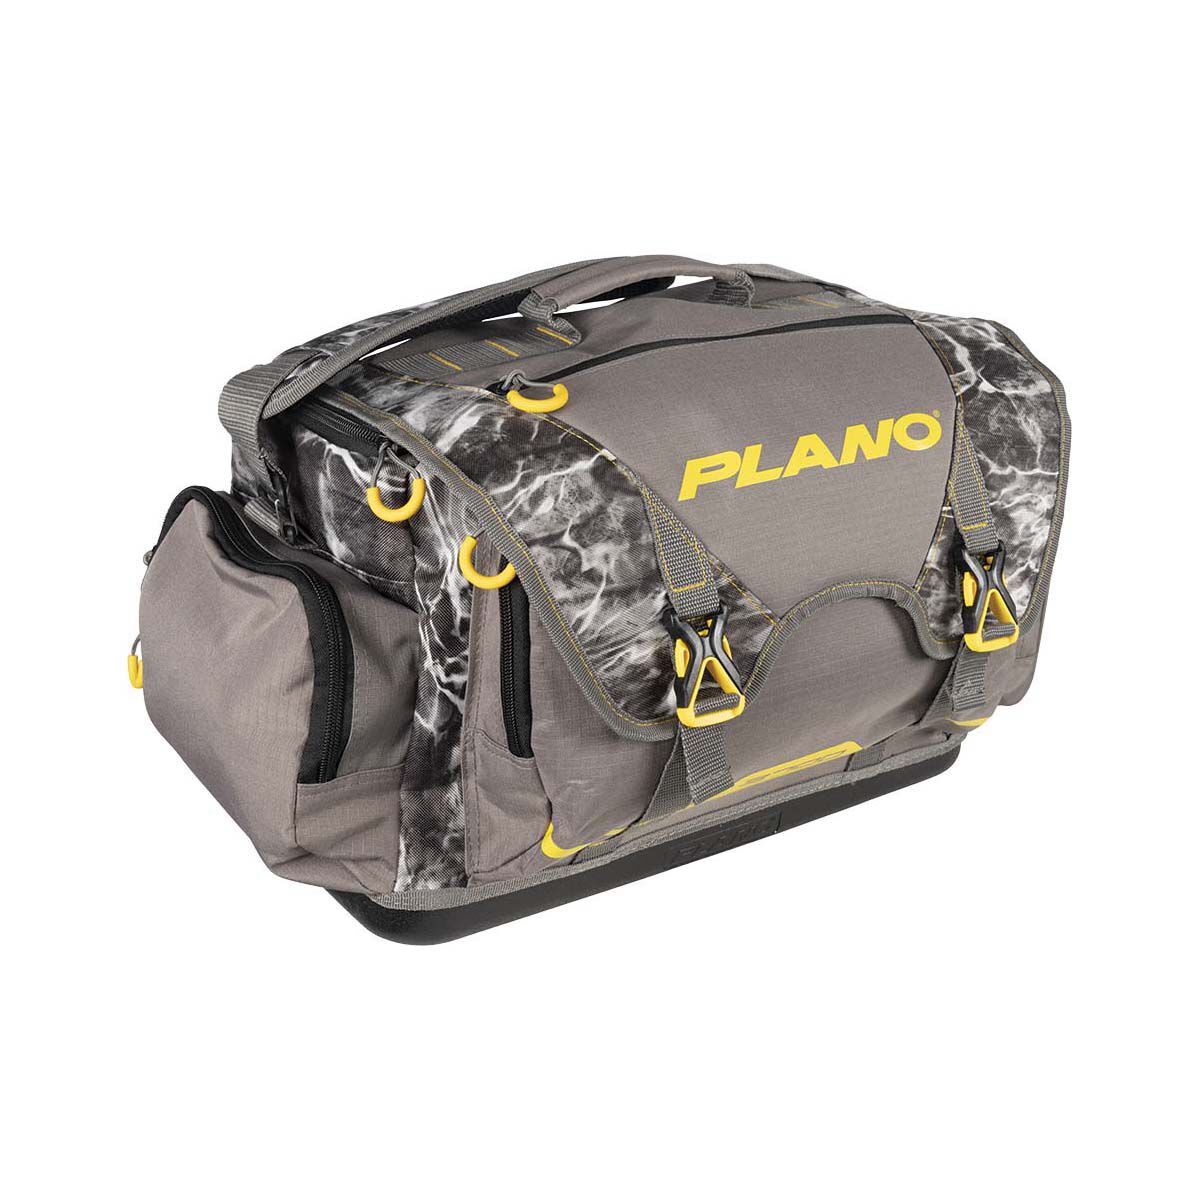 Best Fishing Tackle Bag Byron Bay - Tackle bags online – Missing At Sea